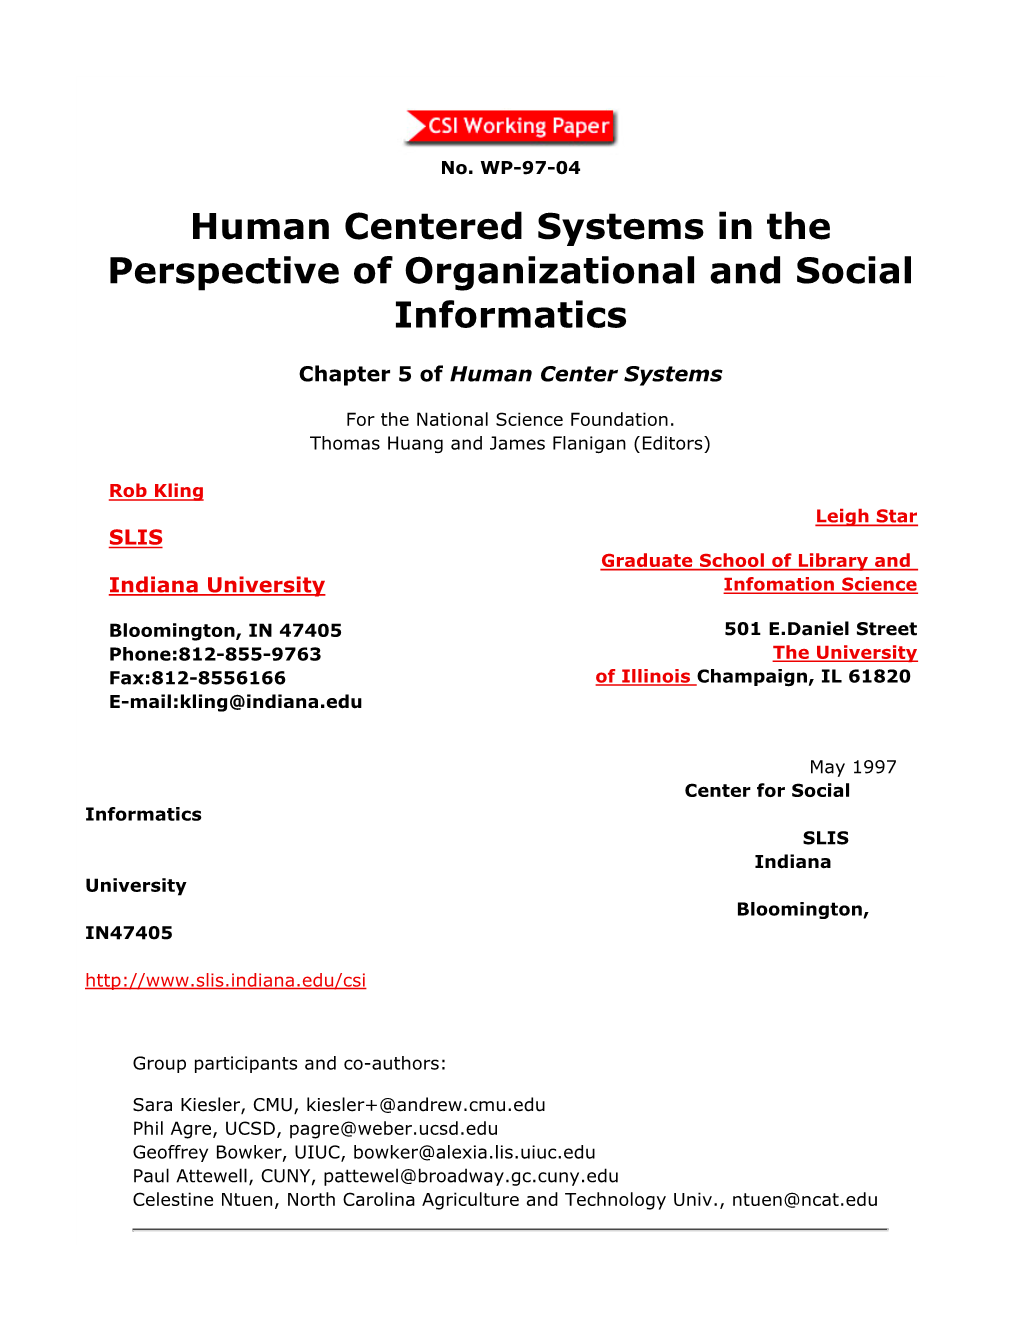 Human Centered Systems in the Perspective of Organizational and Social Informatics